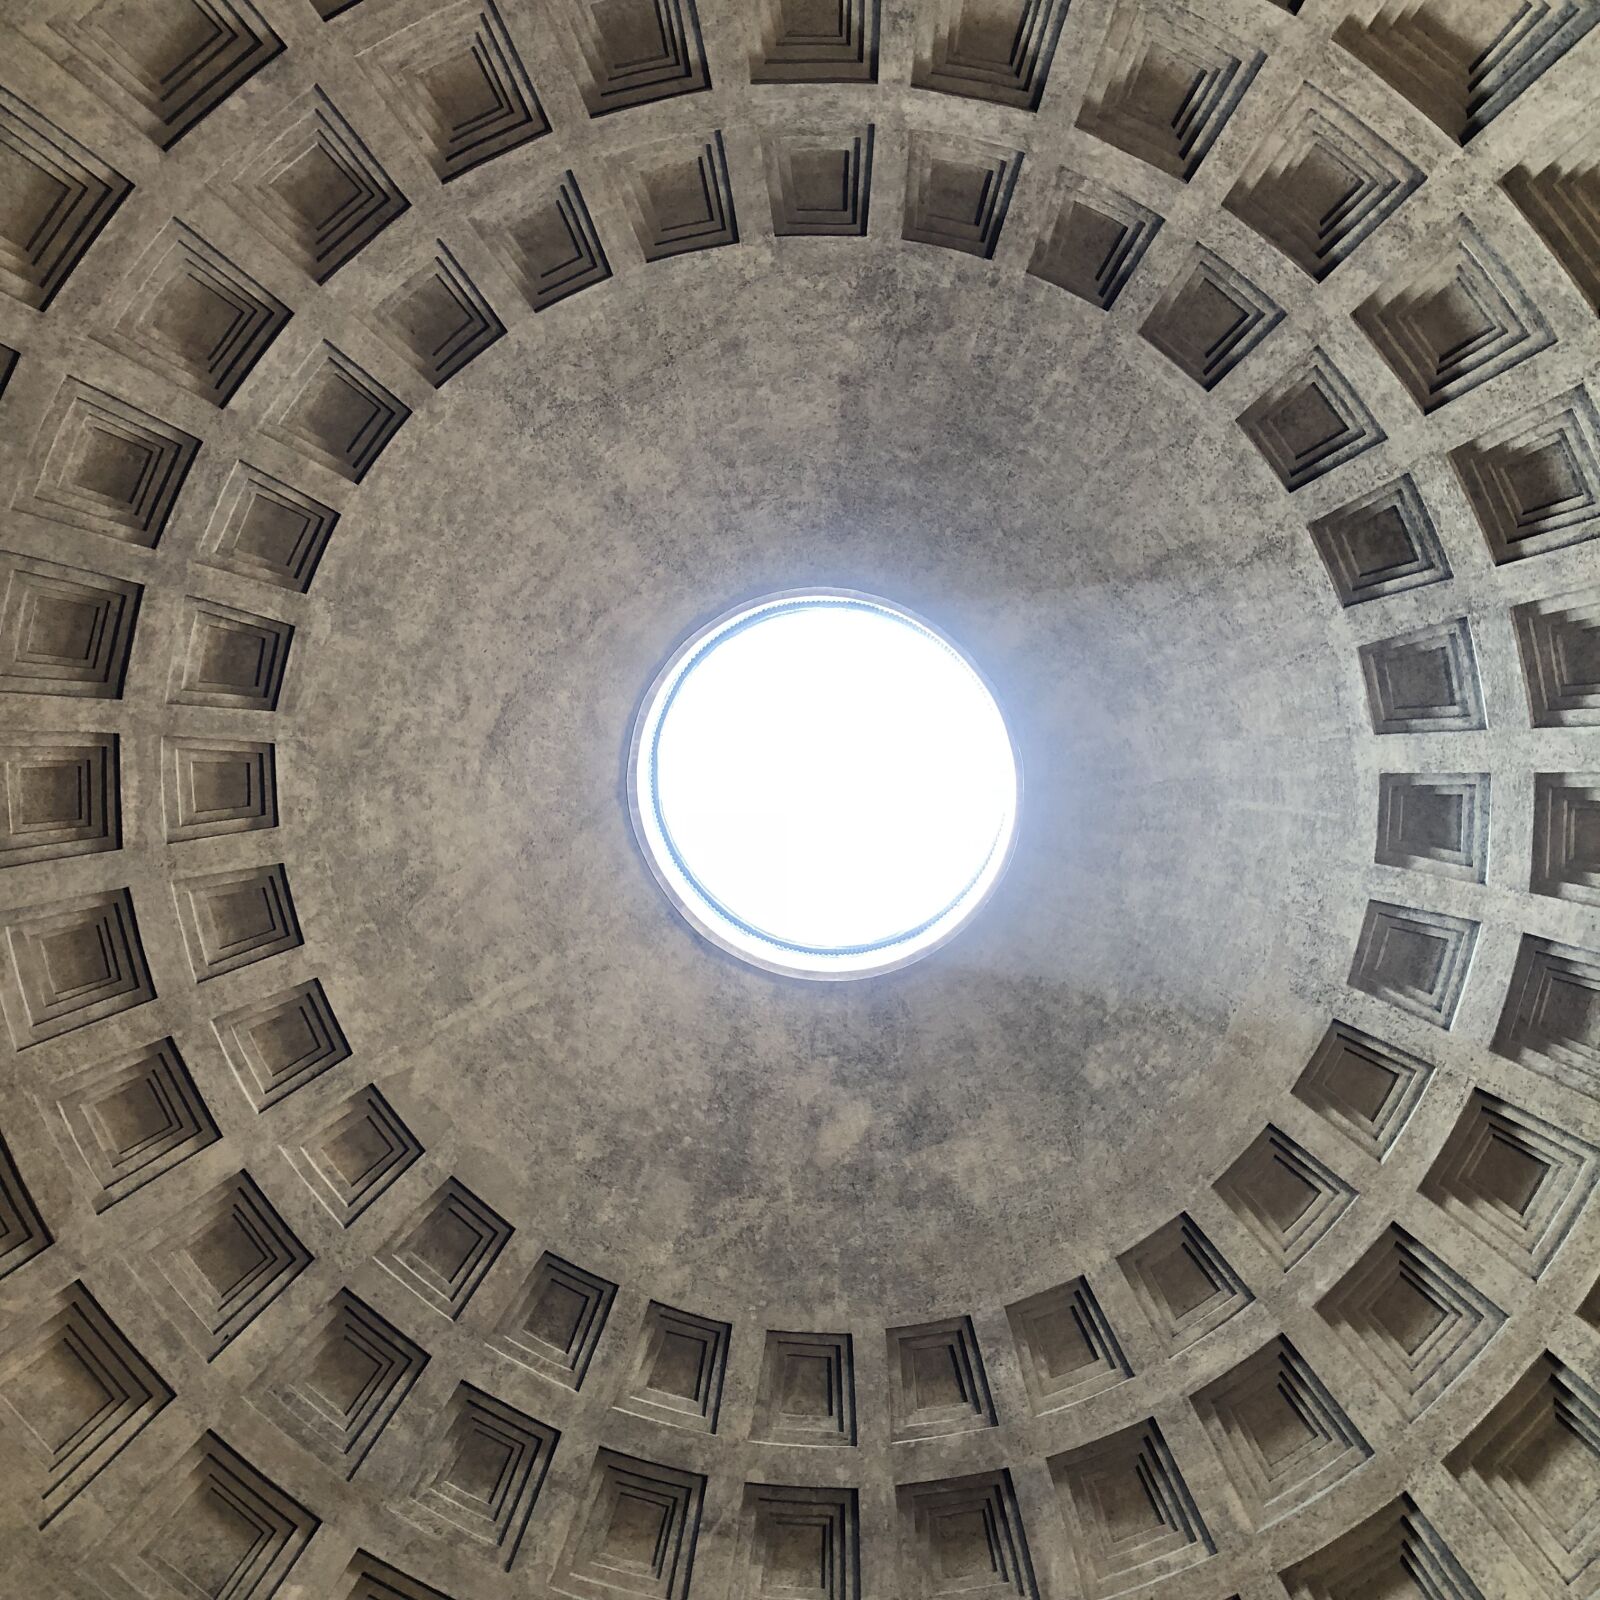 Apple iPhone 8 + iPhone 8 back camera 3.99mm f/1.8 sample photo. Pantheon, ceiling, rome photography